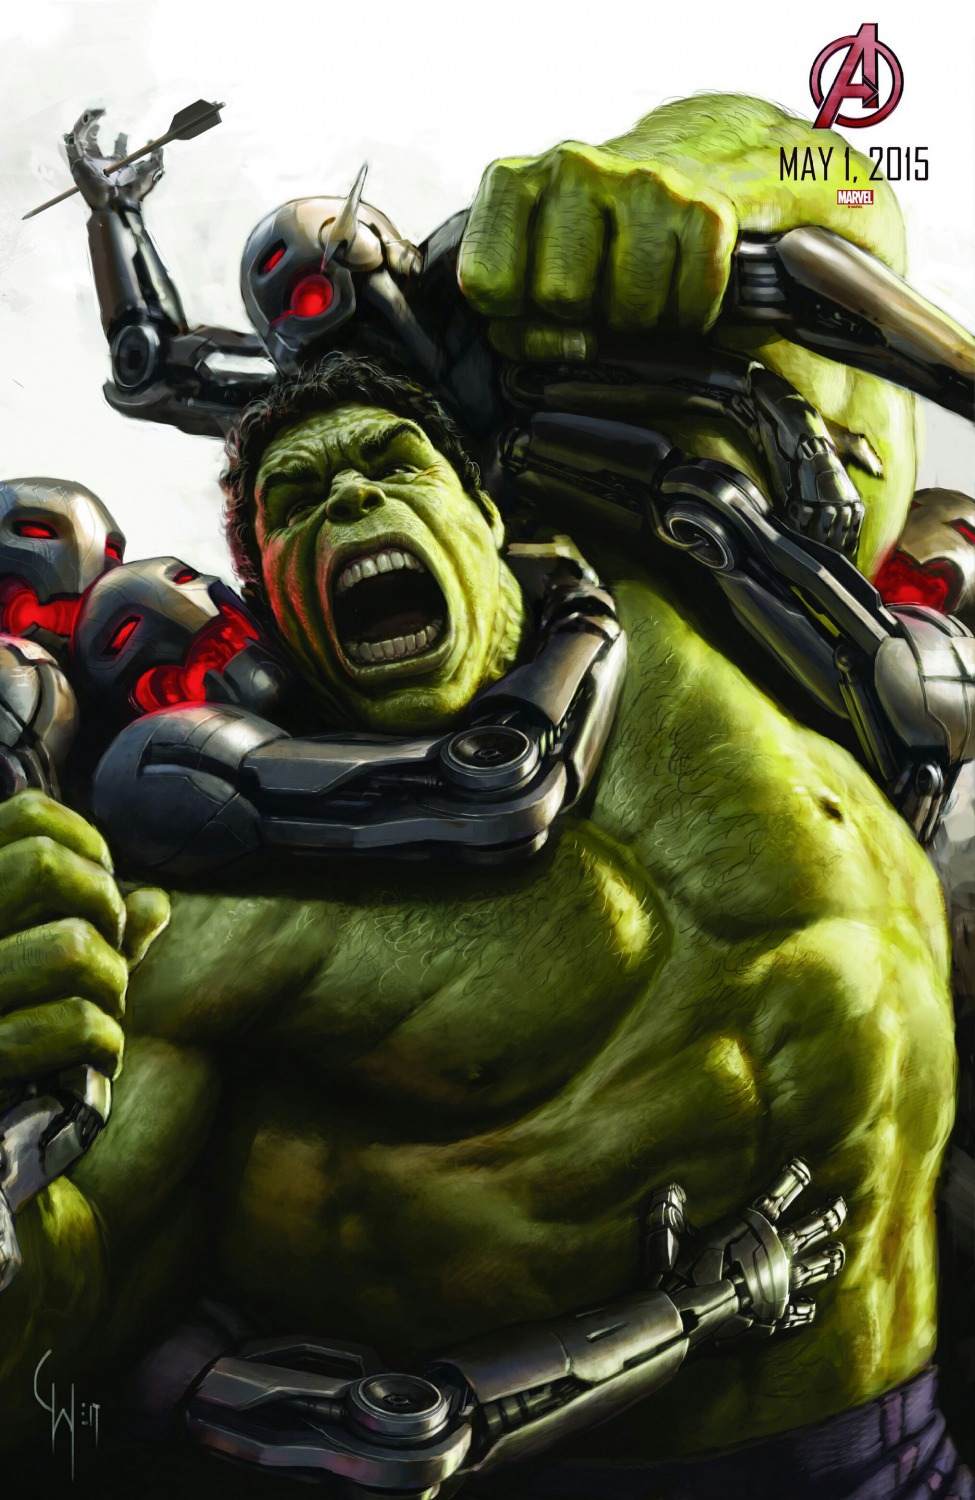 Extra Large Movie Poster Image for Avengers: Age of Ultron (#5 of 36)